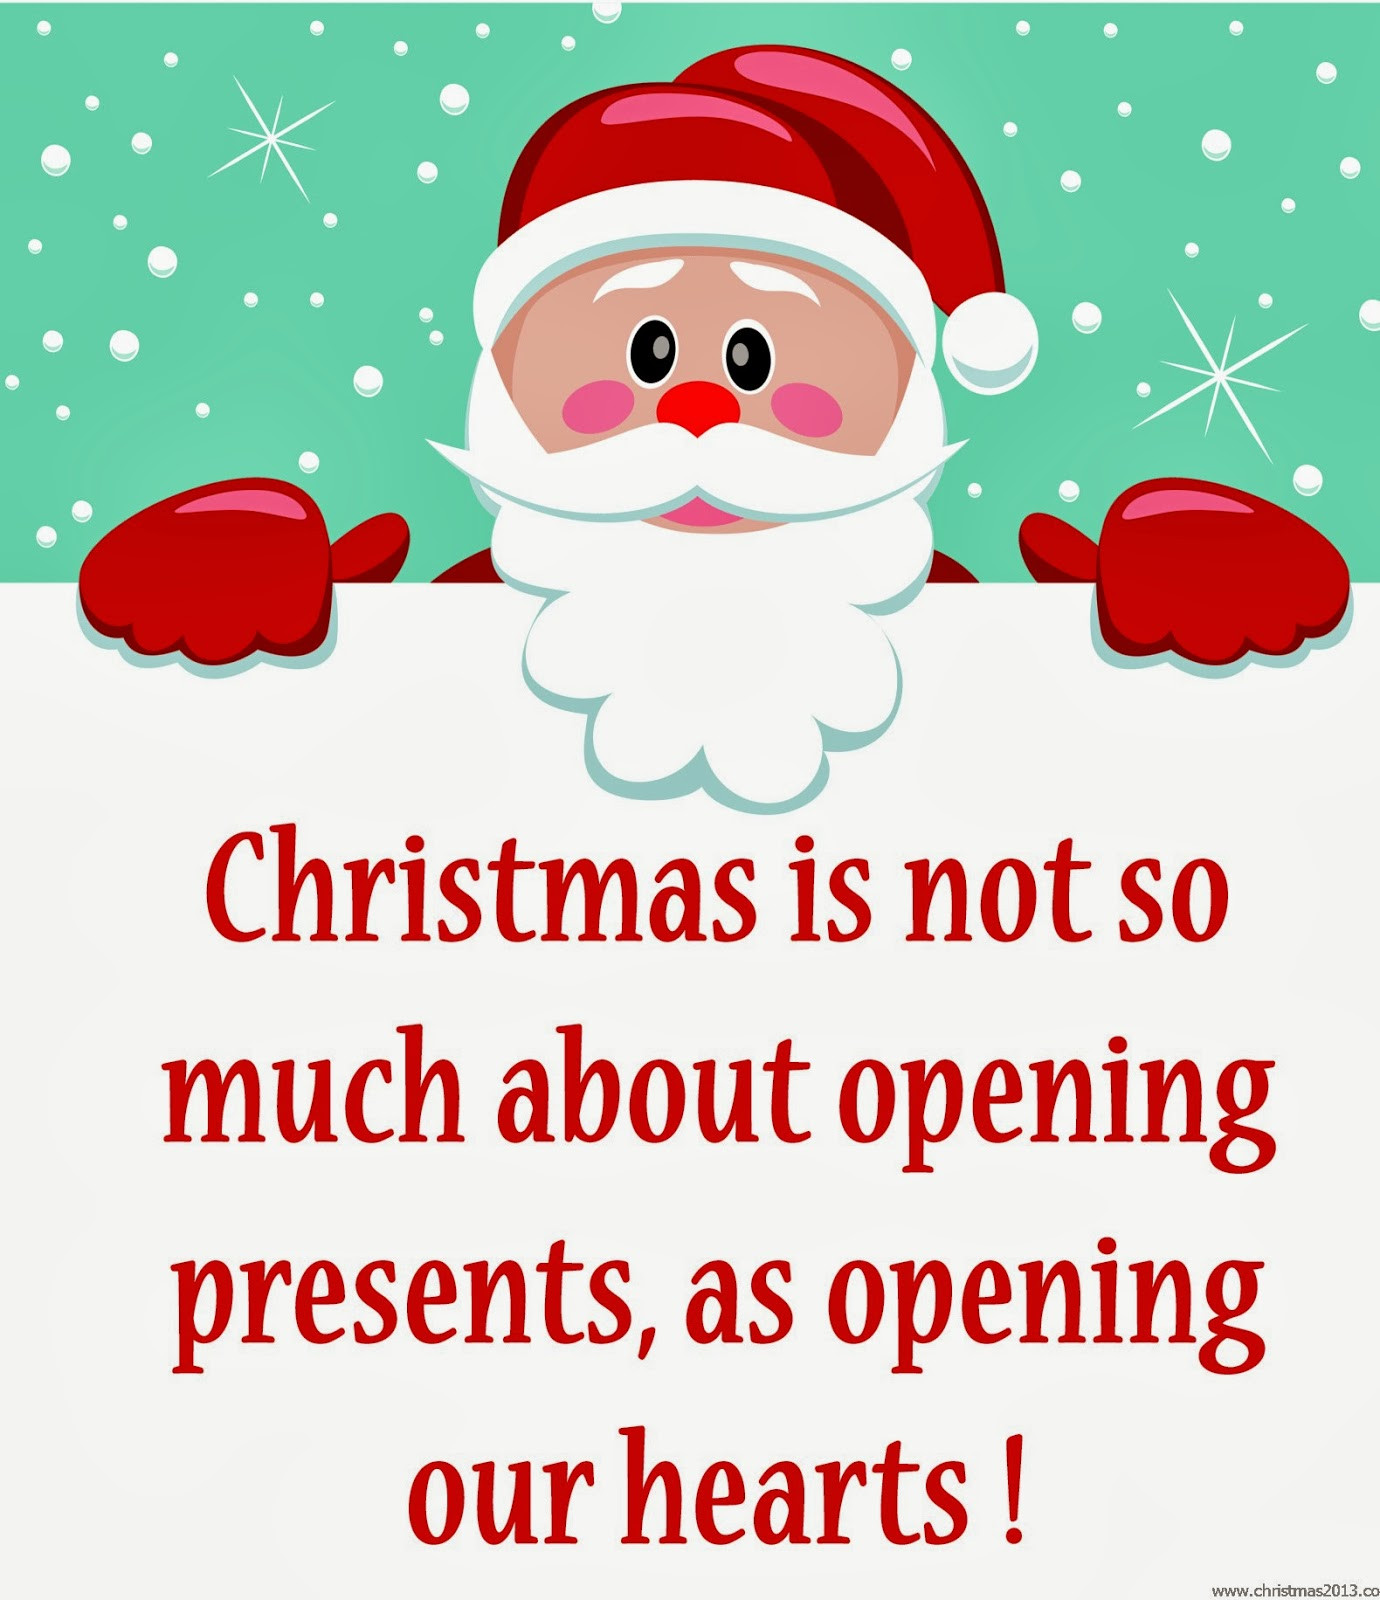 Quotes Christmas
 25 Best Christmas Quotes And Wishes Quotes Hunter